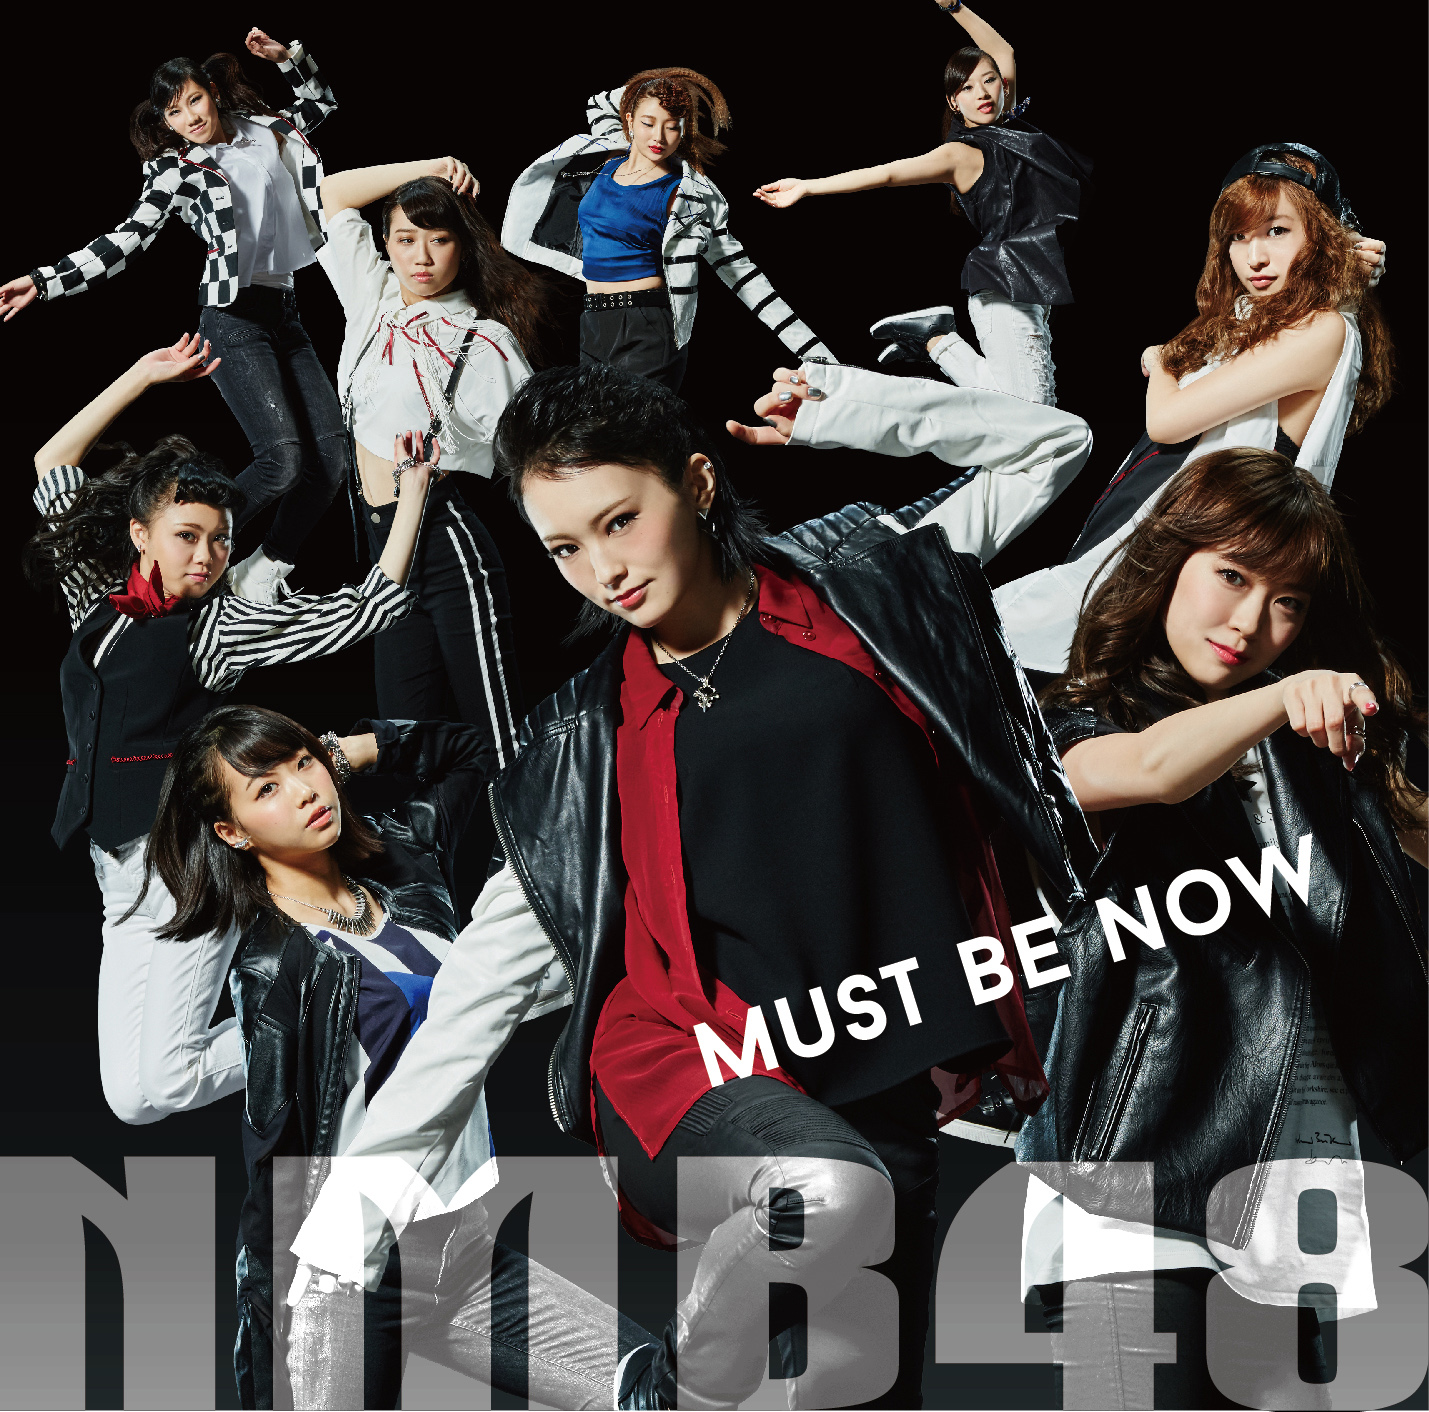 13thシングル「Must be now」